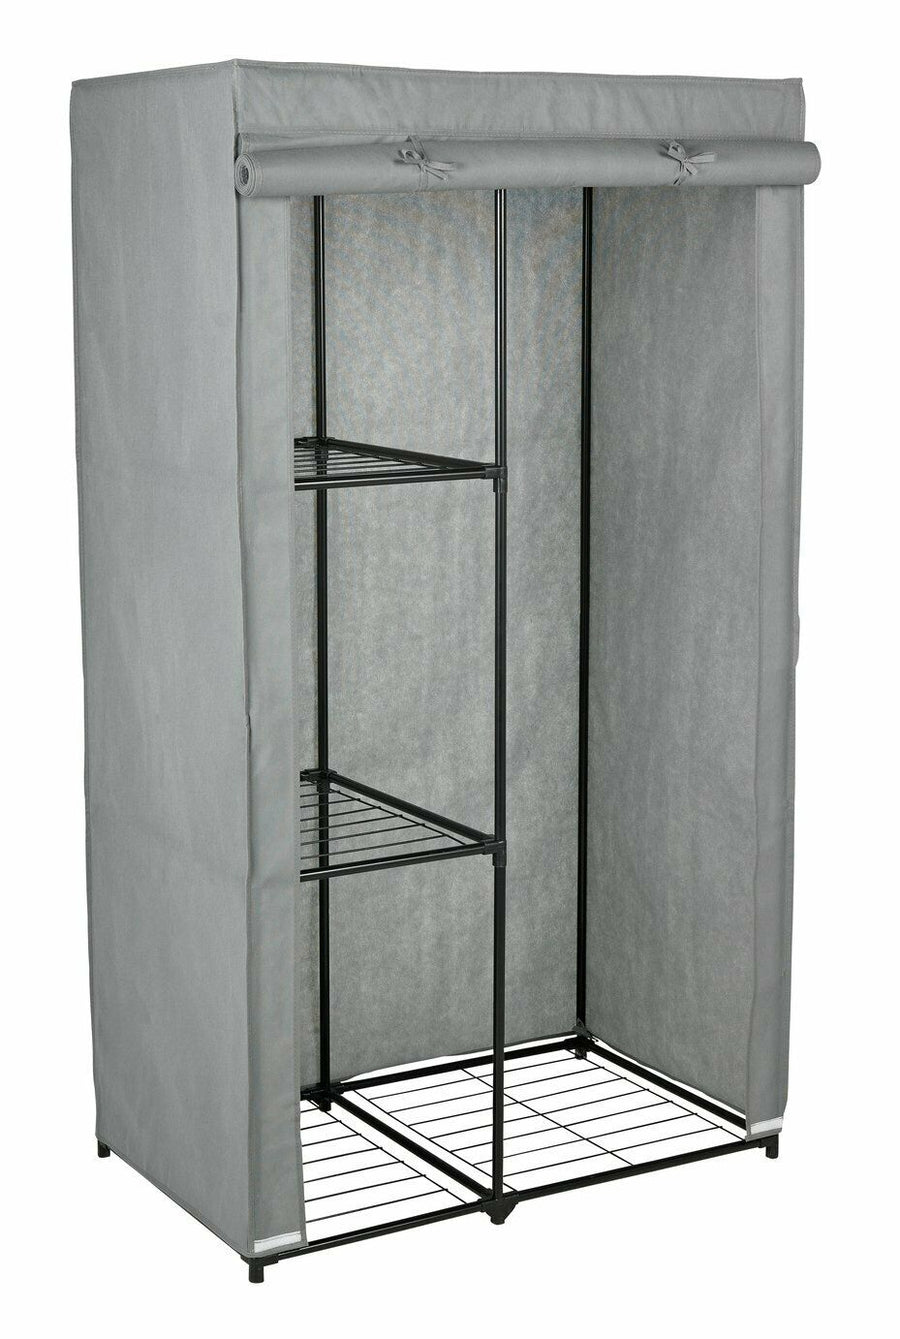 Home Covered Single Wardrobe With Shelves - Grey